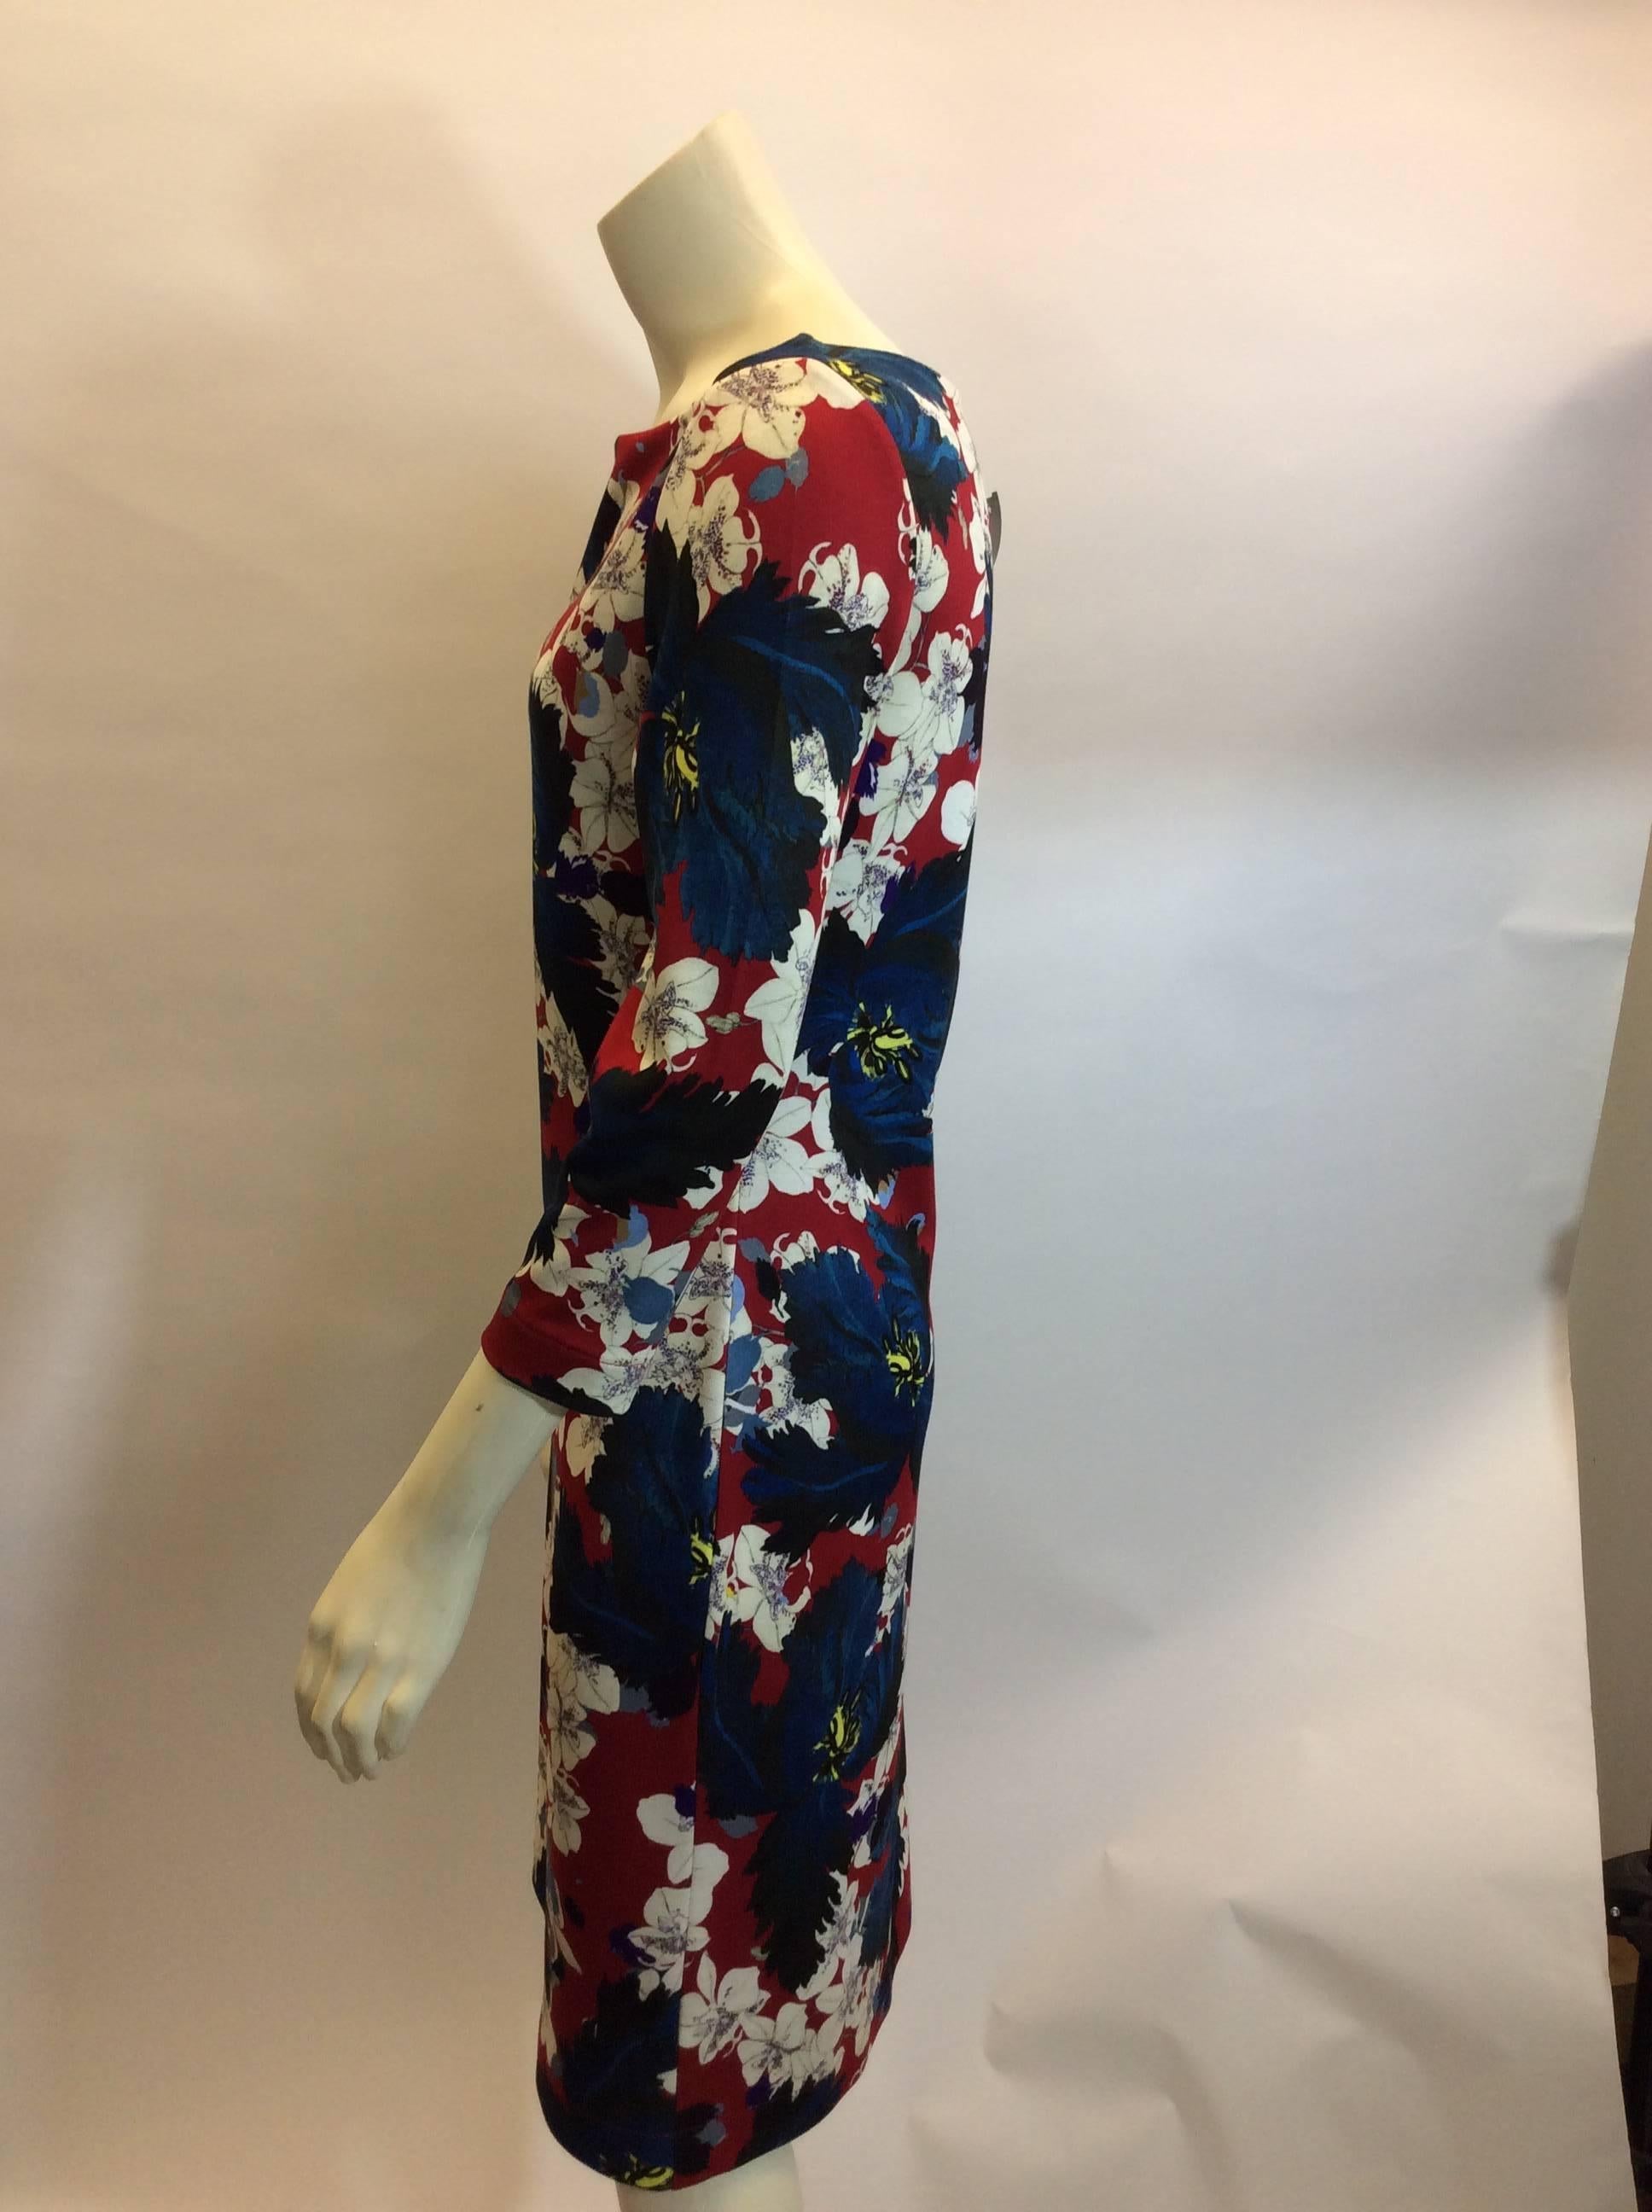 Erdem Floral Jersey Dress
Jersey style (viscose and elastane)
Red floral print
Made in Portugal
$299
